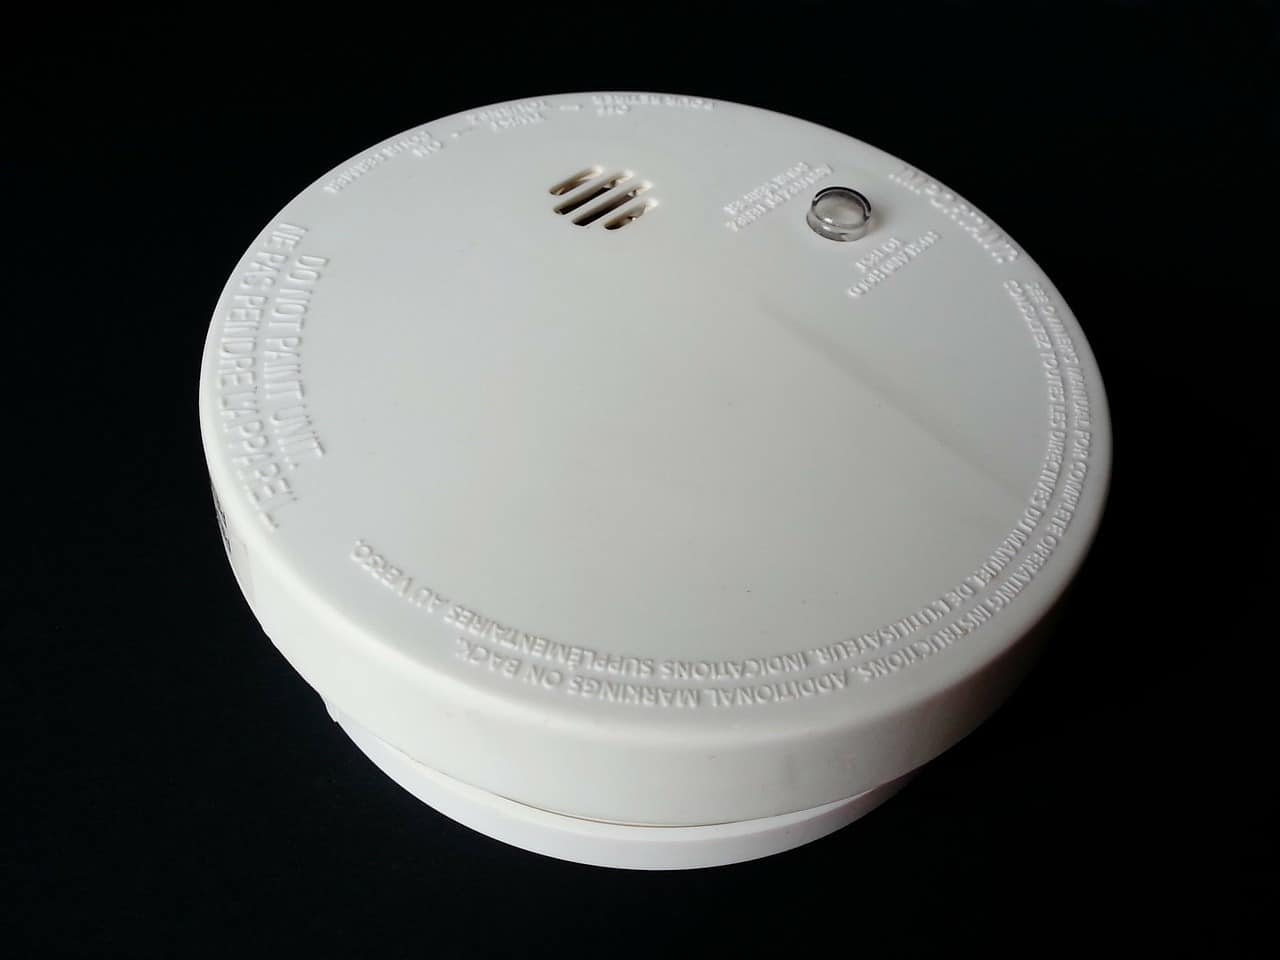 A white smoke detector sitting against a black background.